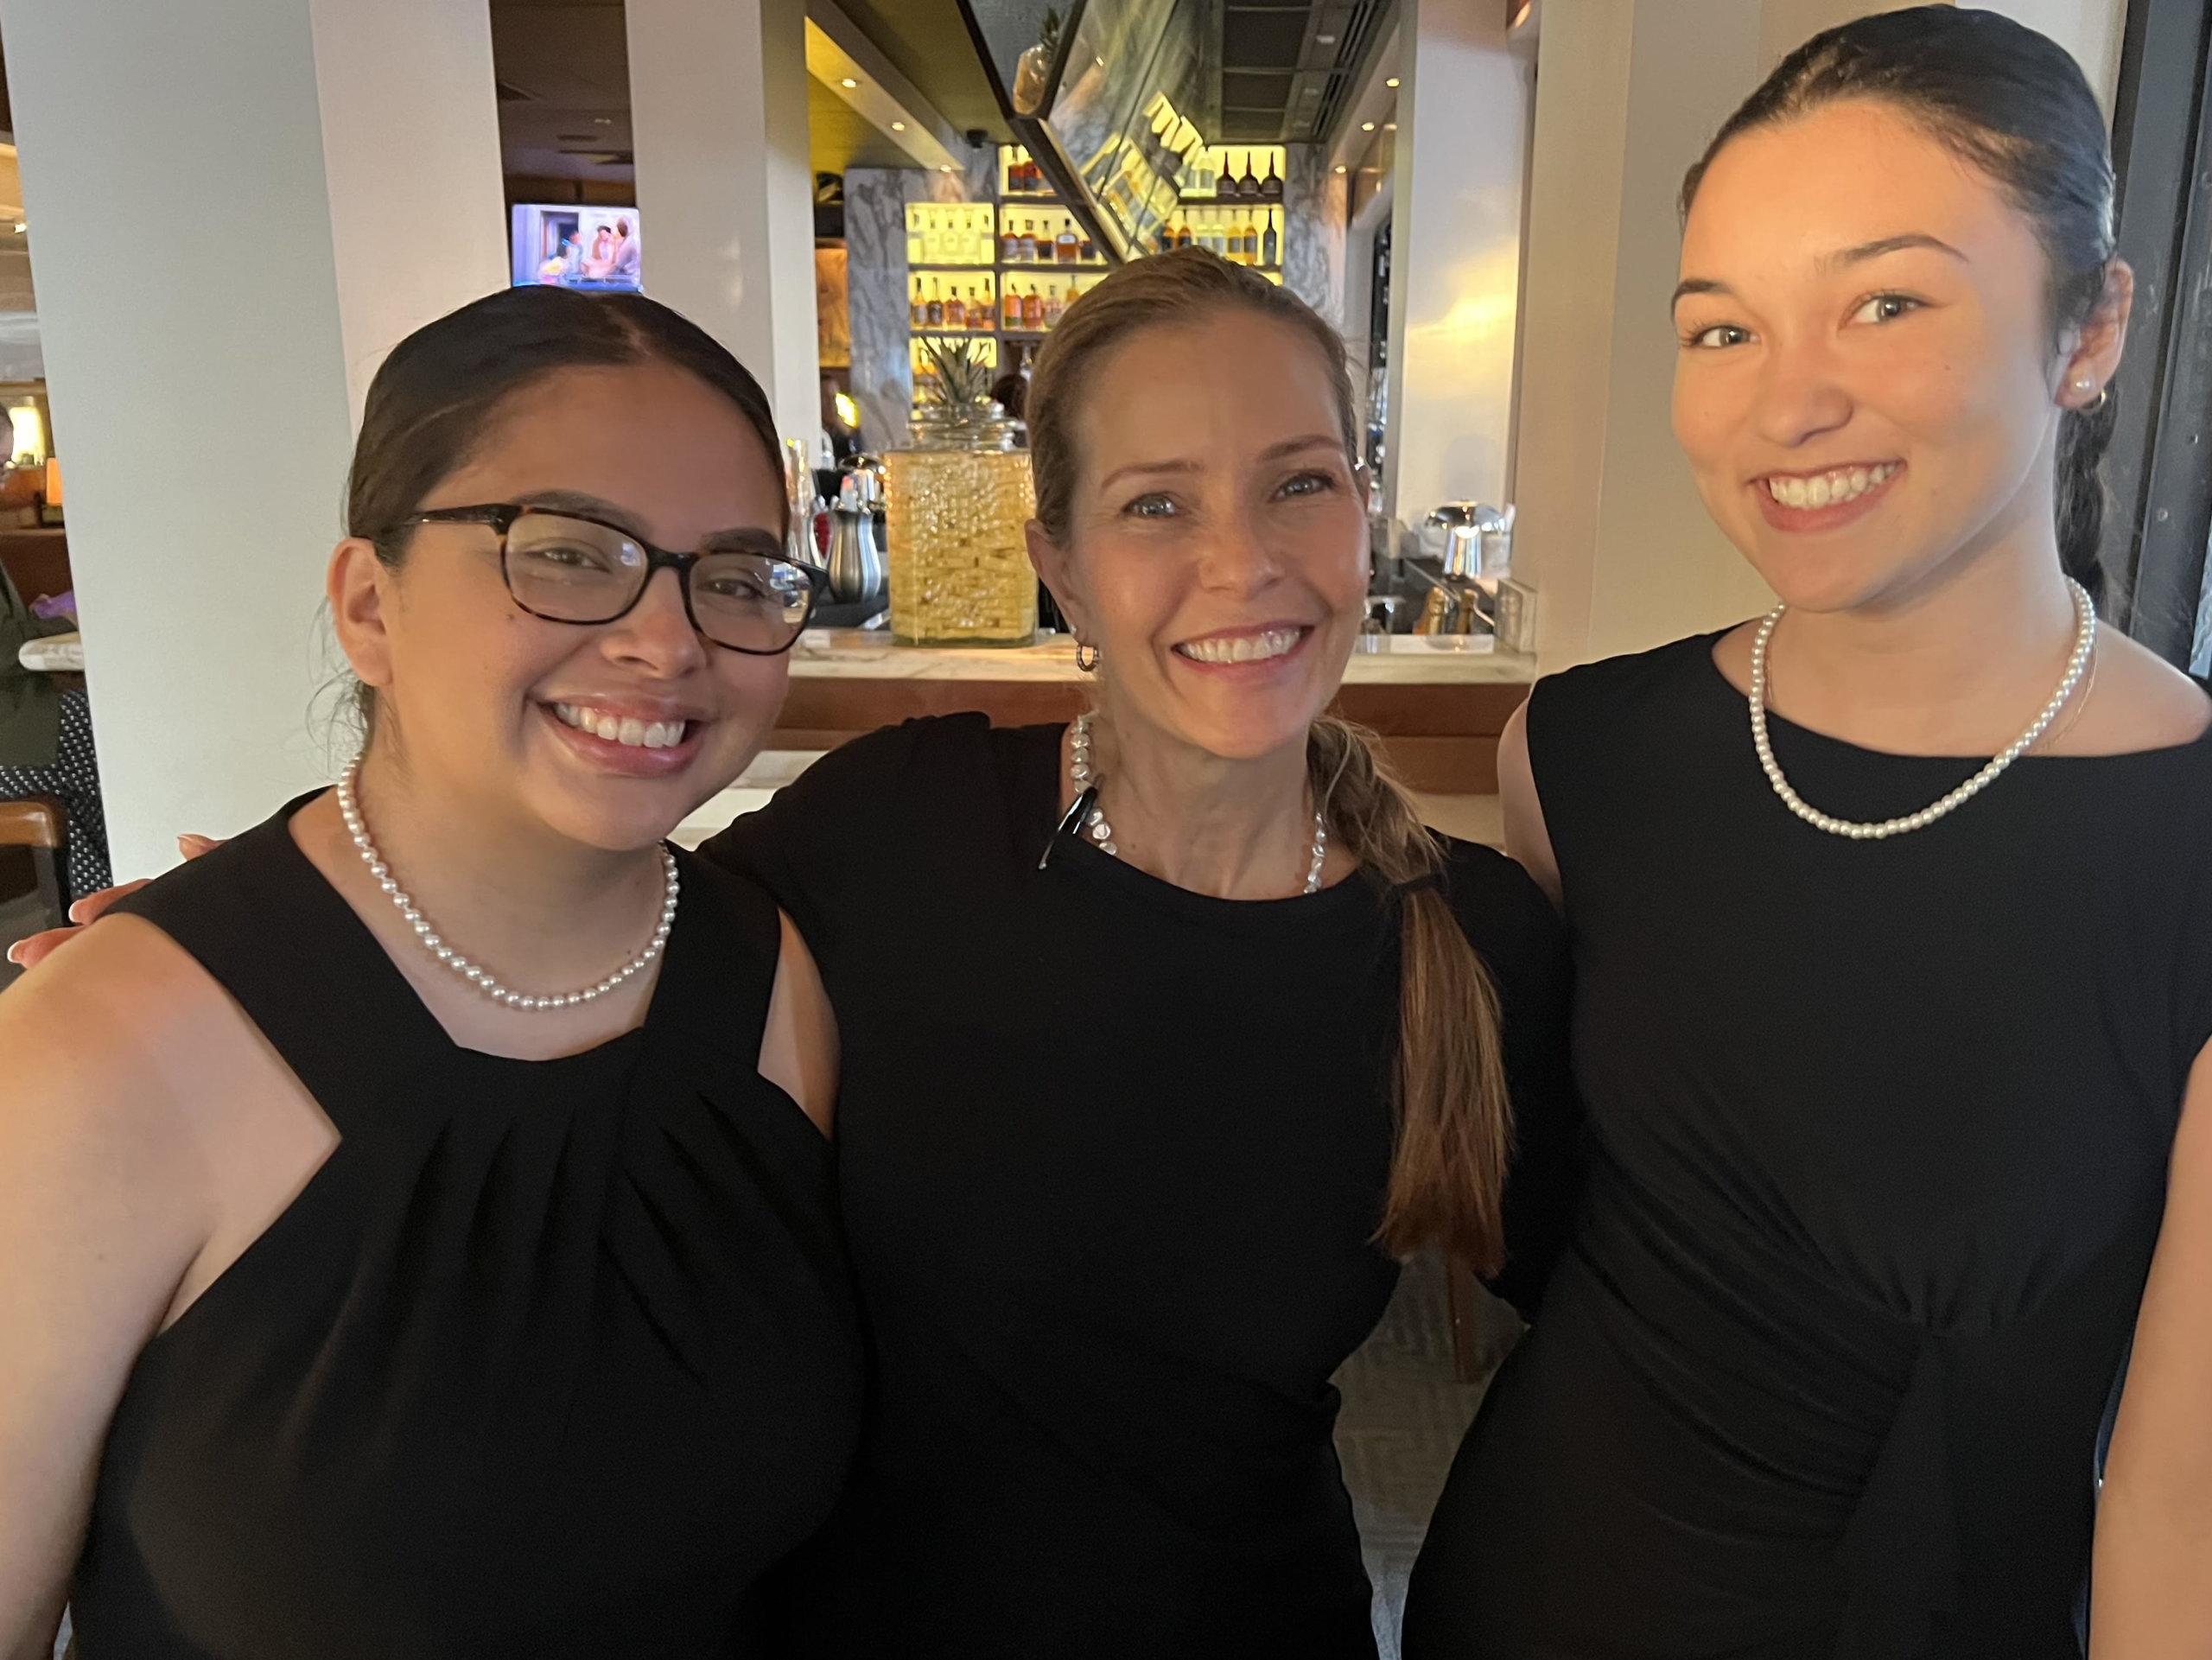 The "girls with the pearls" at BrickTops: Aleve, Audrey and Cindel